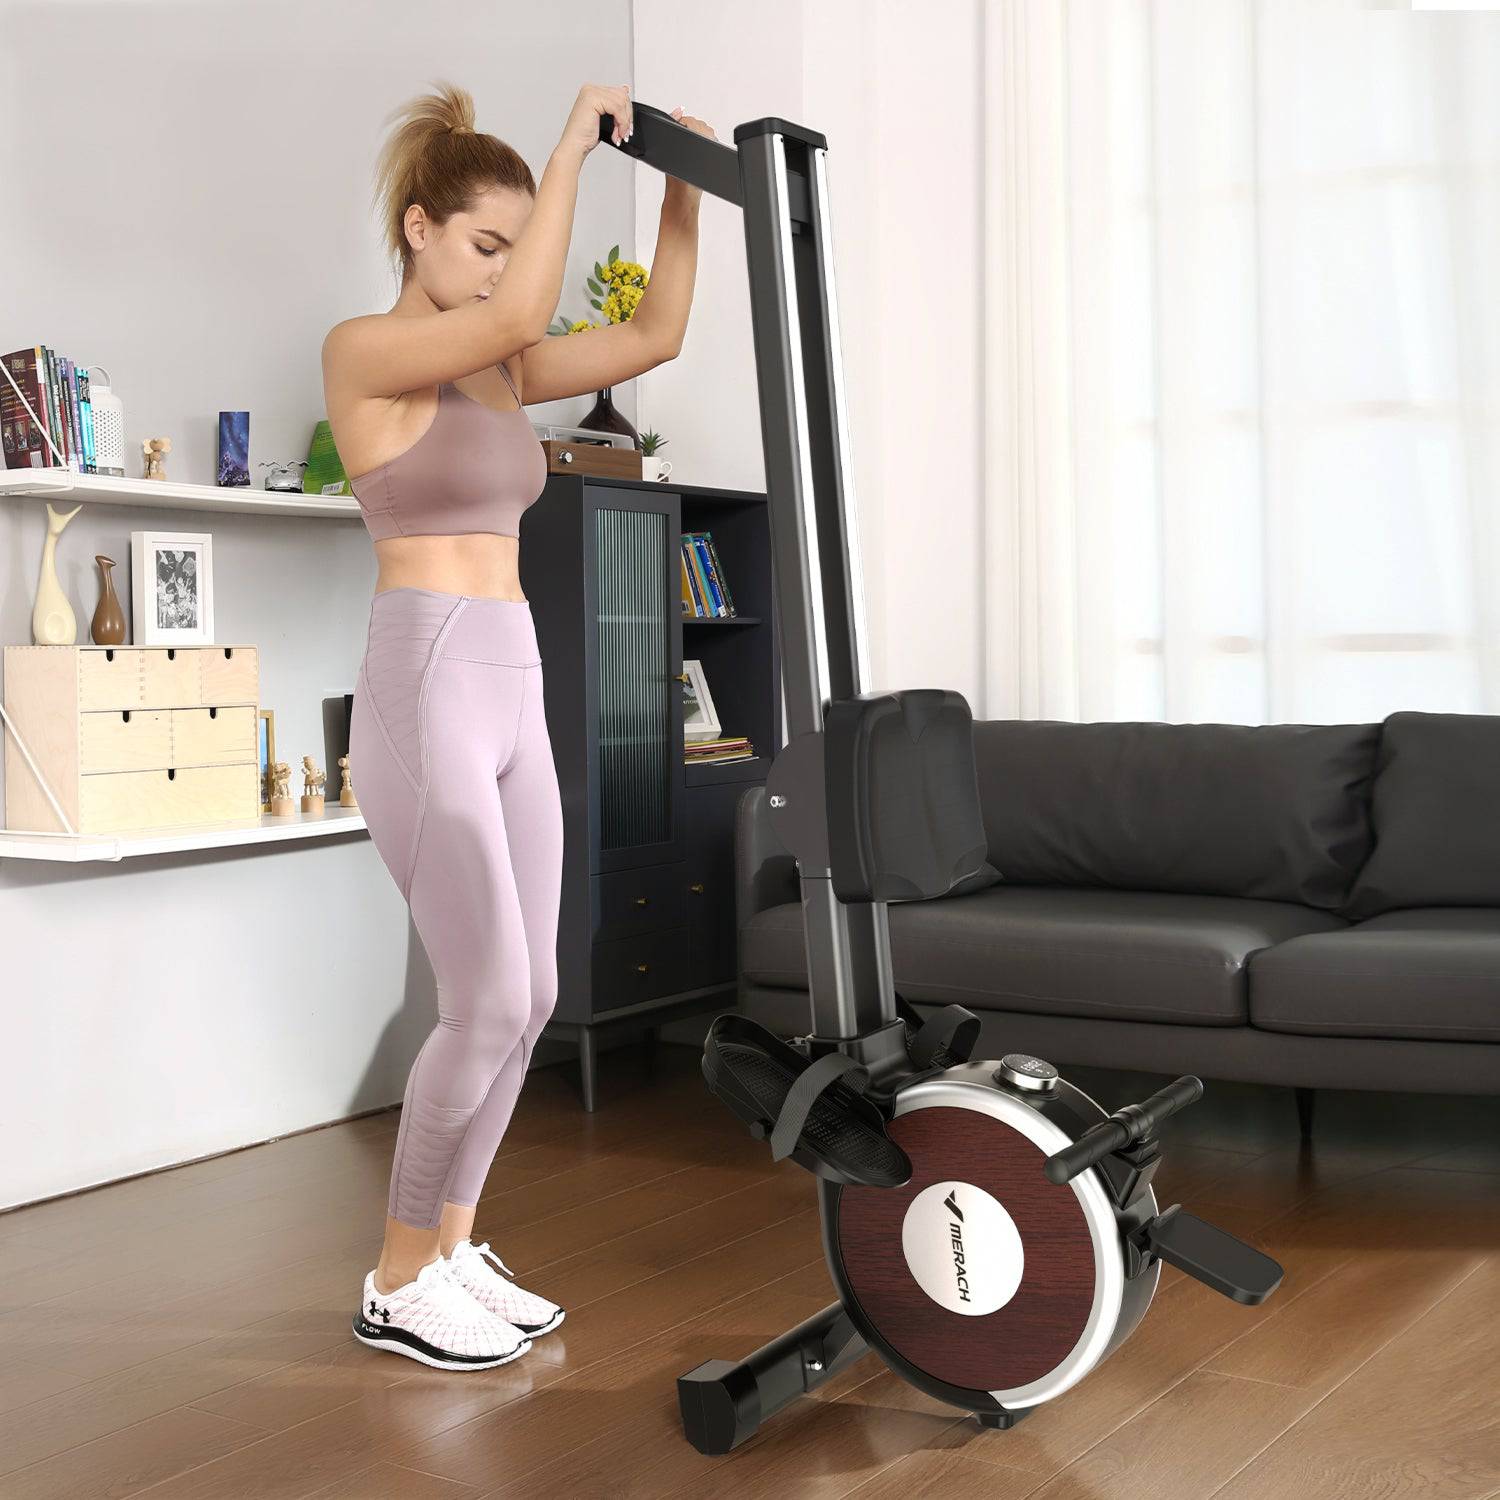 MERACH - Q1S Auto Electromagnetic Smart Rower